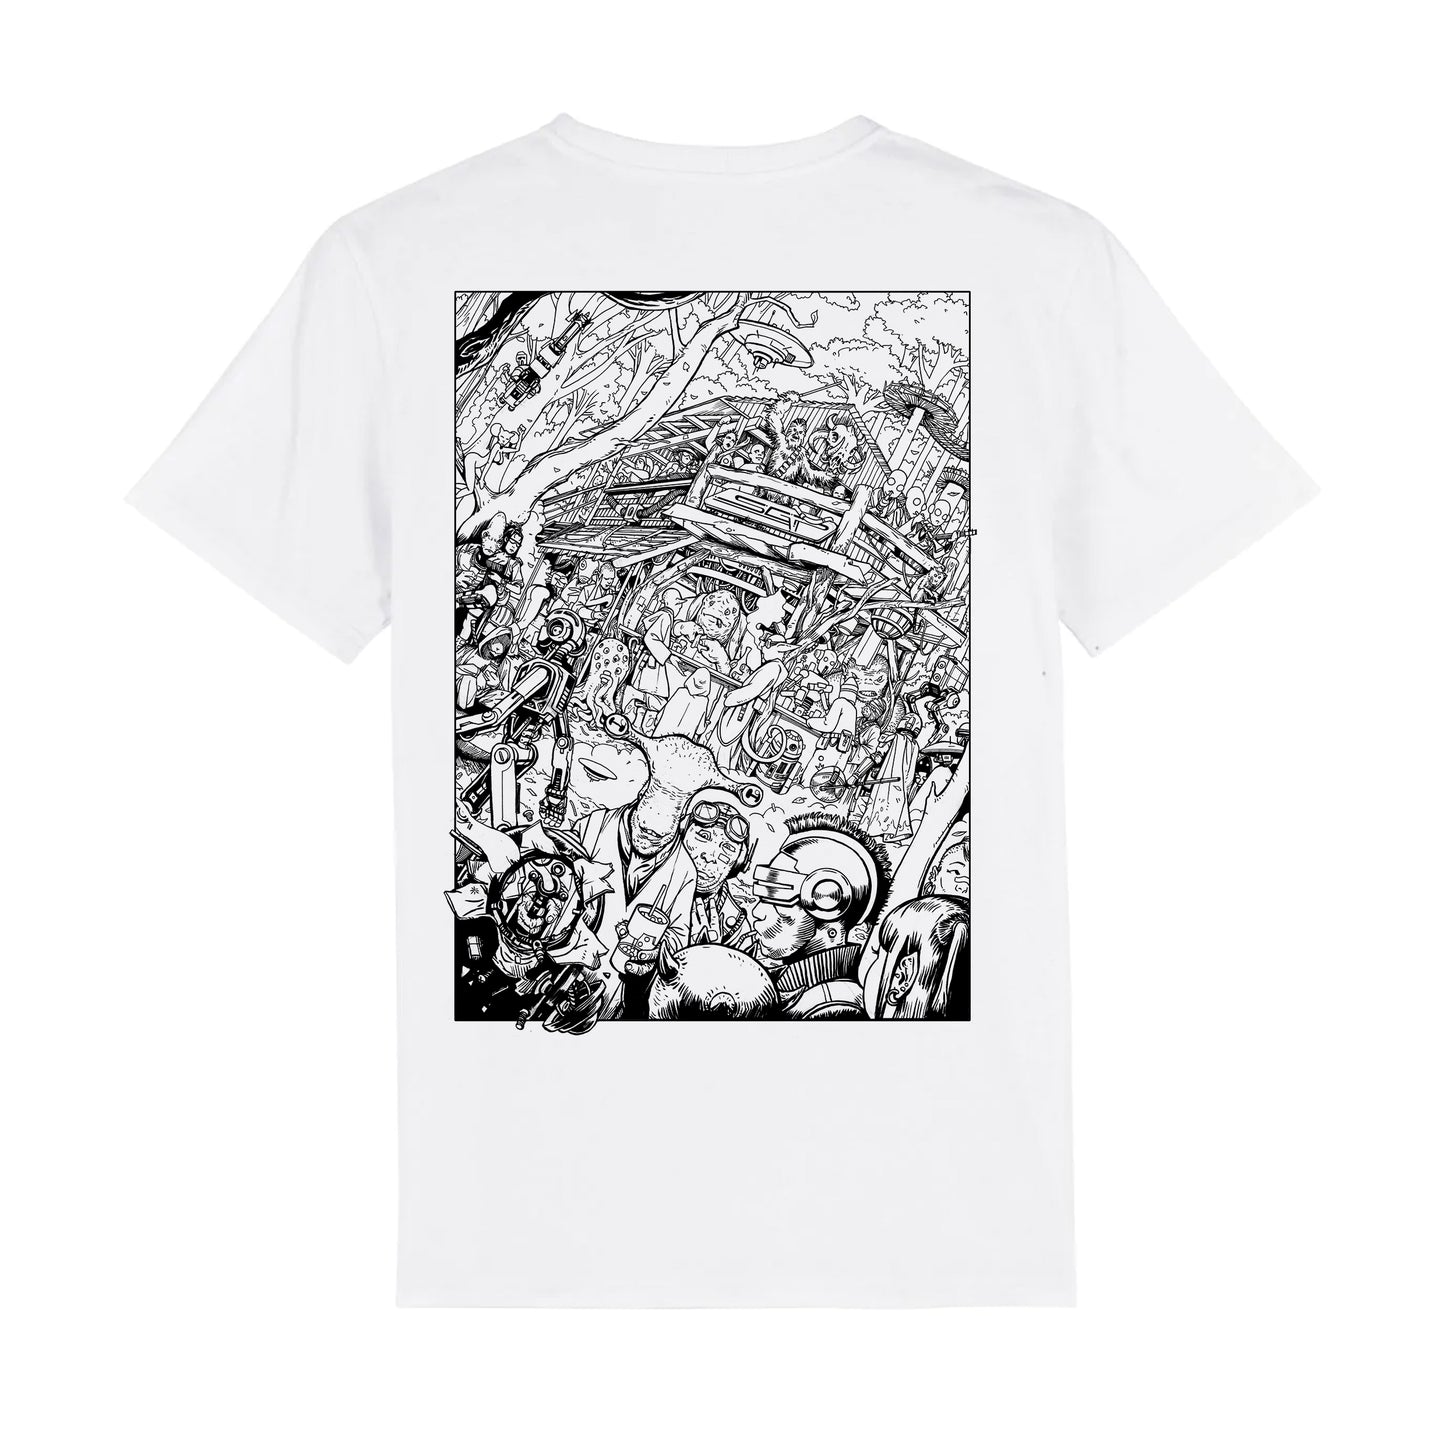 Secret Garden Party x Play Attention - The Woods Stage T-Shirt & Poster Bundle